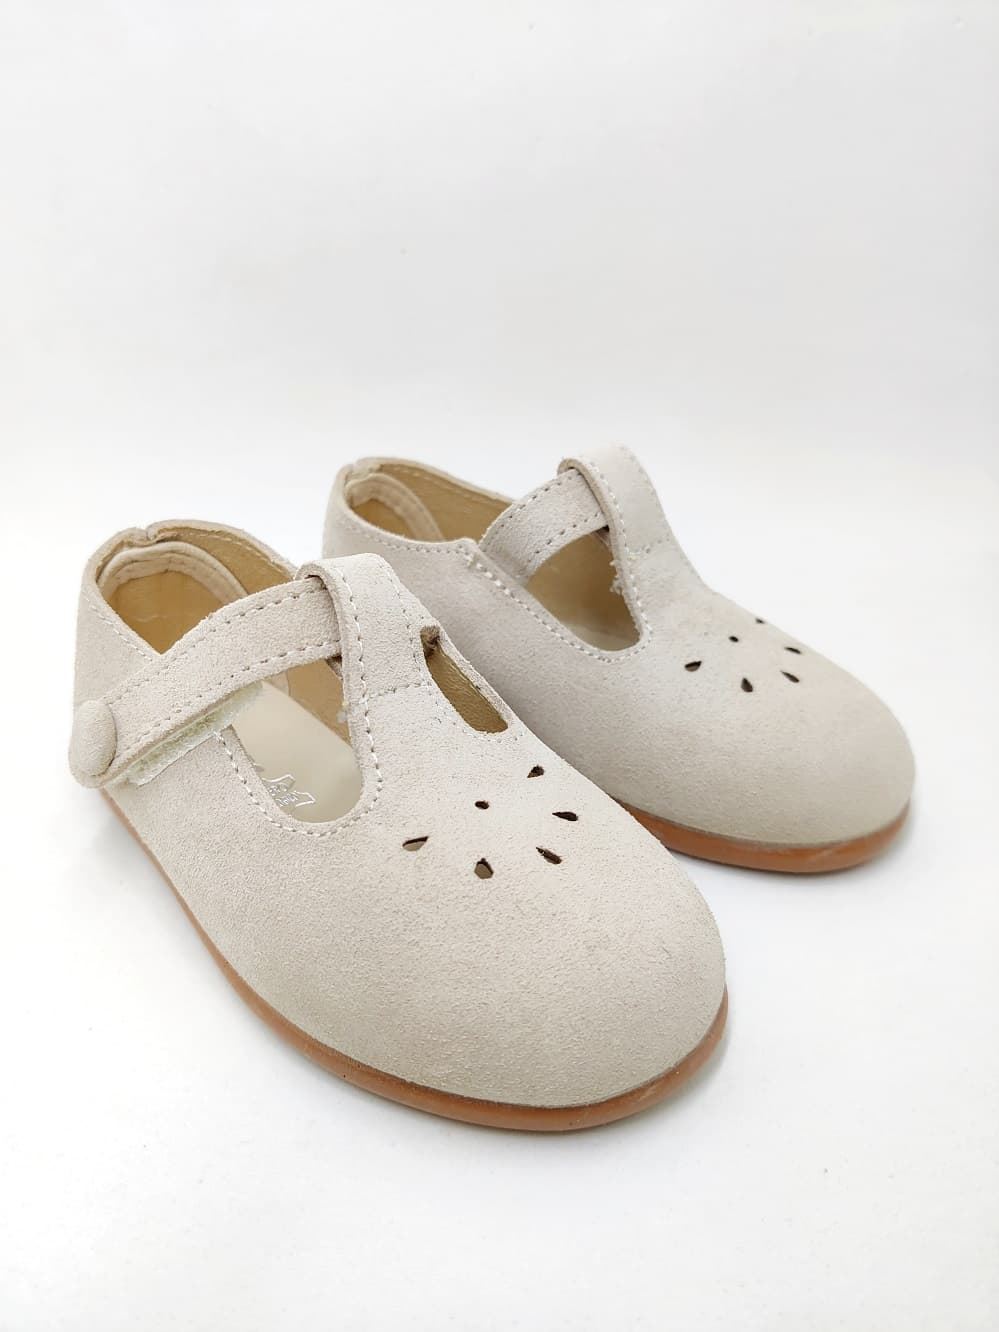 Unisex children's Pepito sweets in raw suede - Image 1